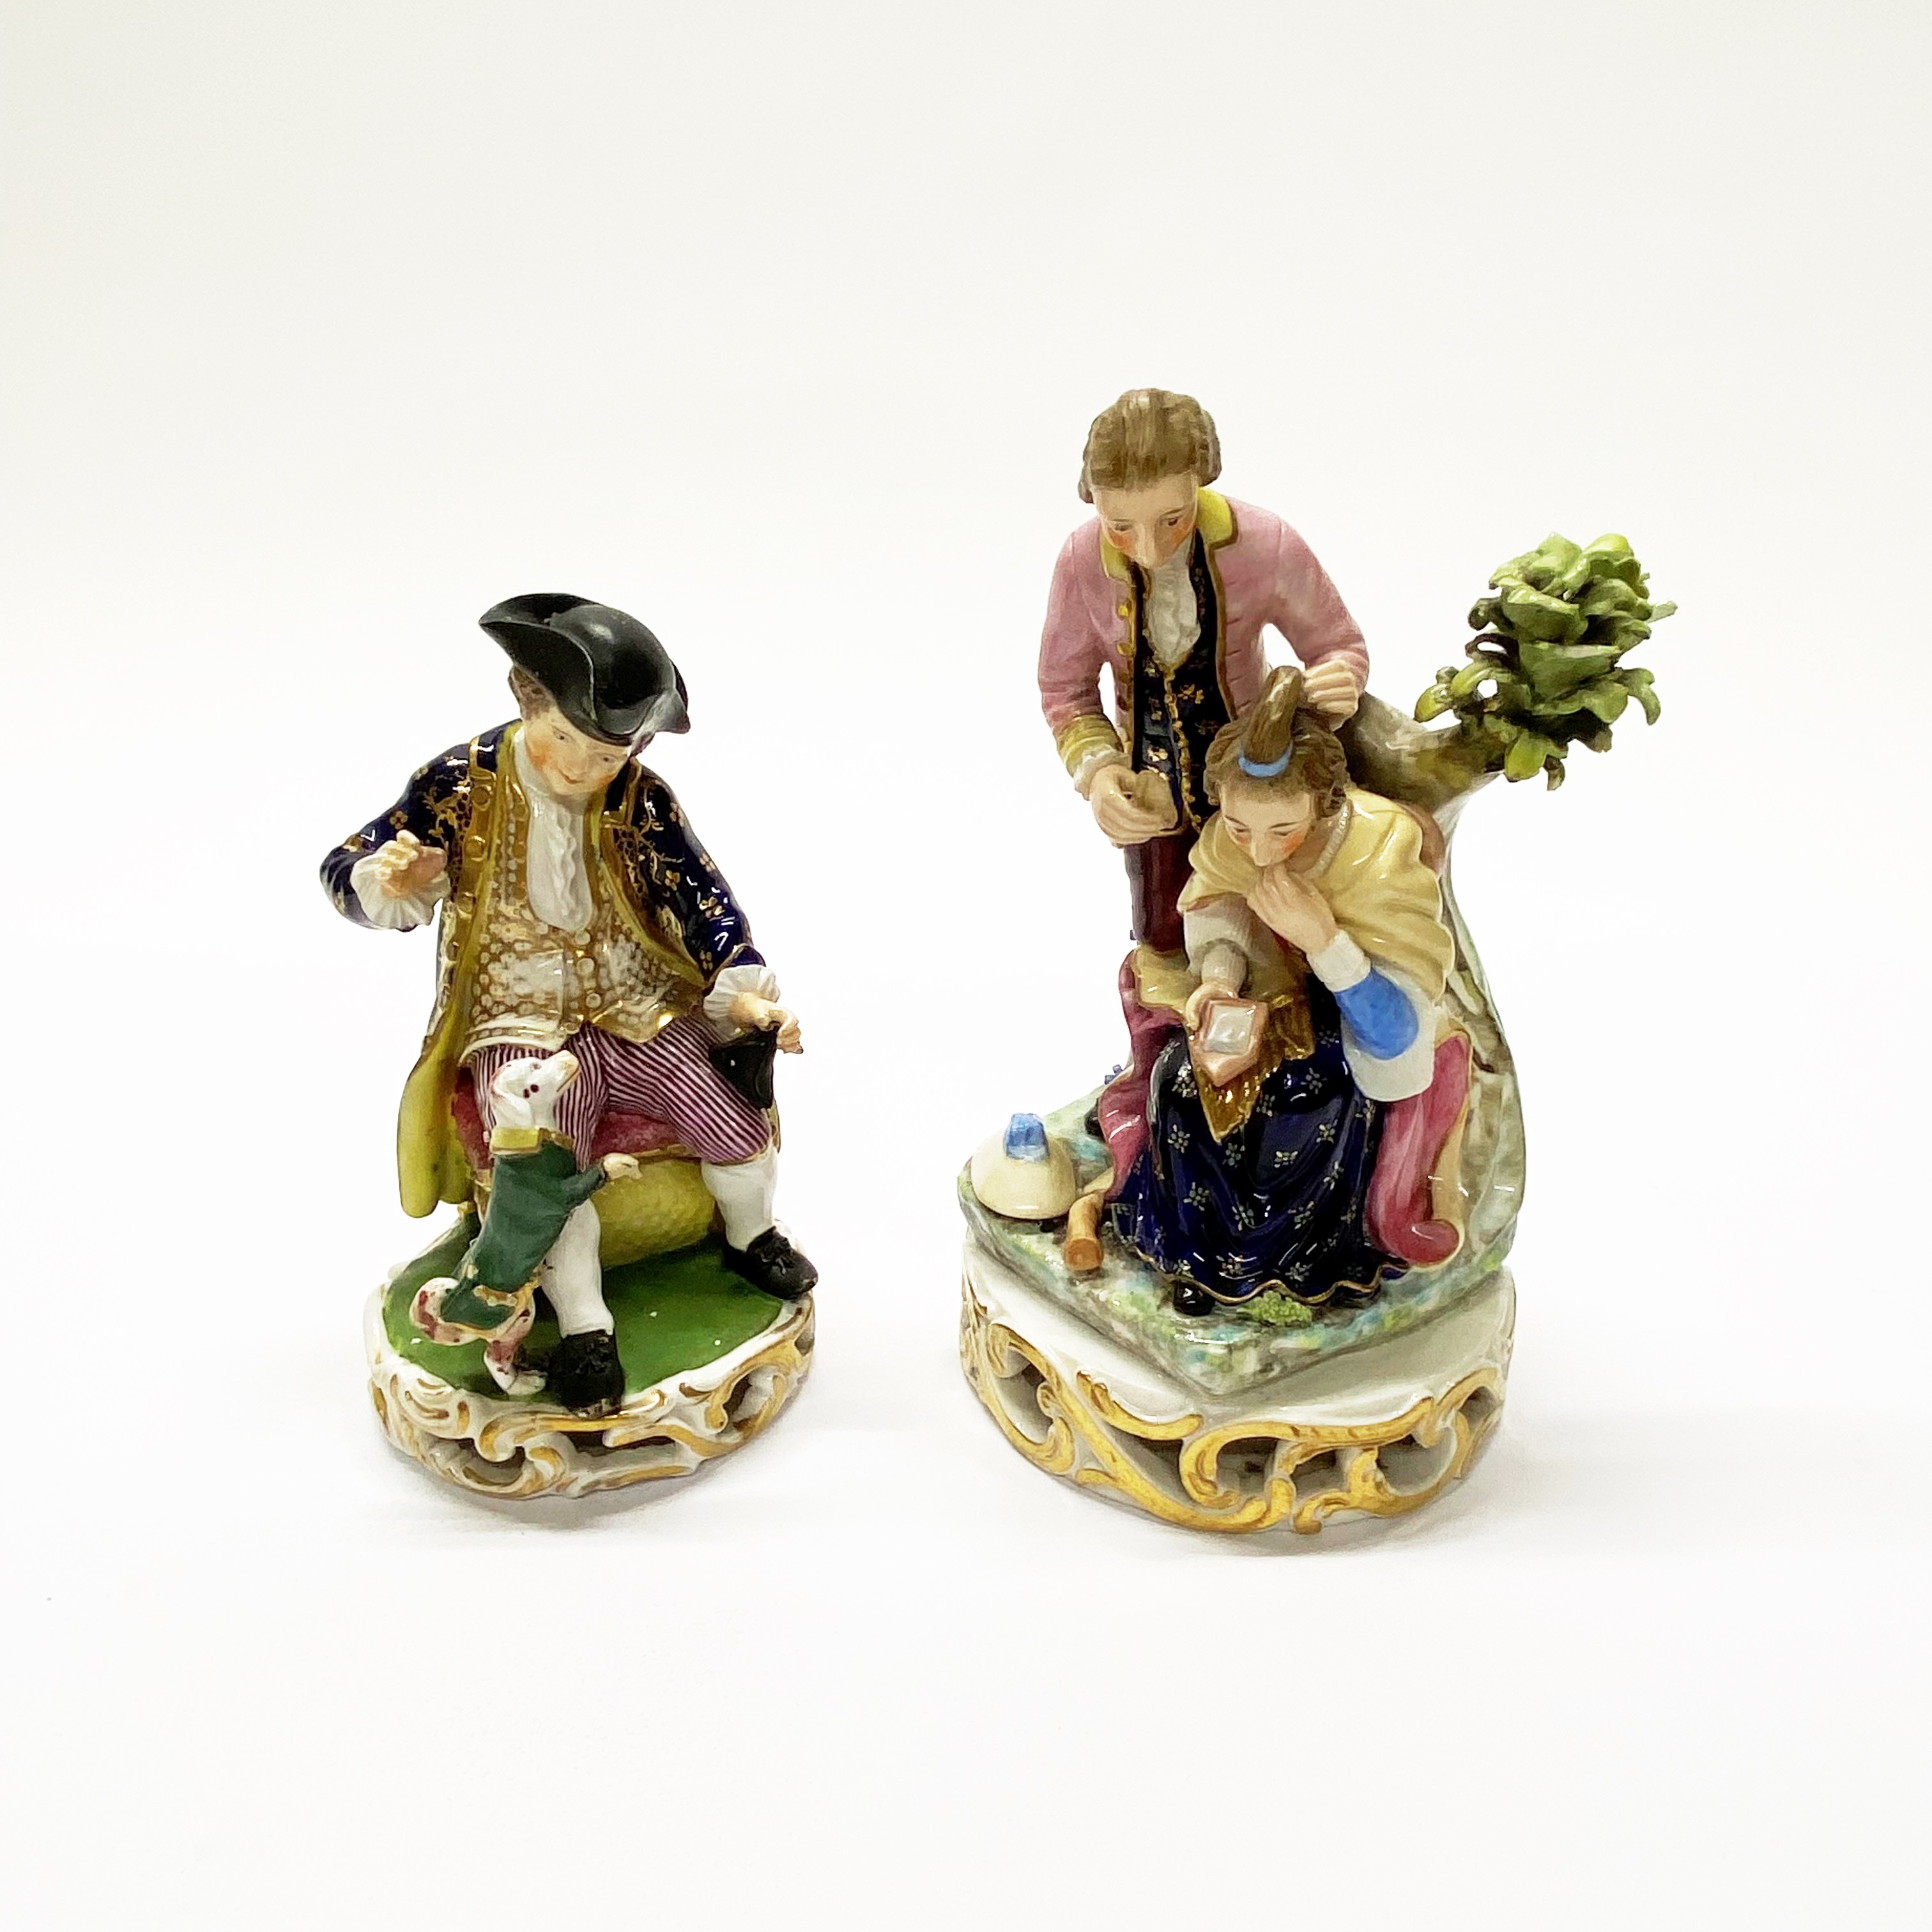 An early Bloor Derby porcelain figure of a boy with a performing dog together with Bloor Derby